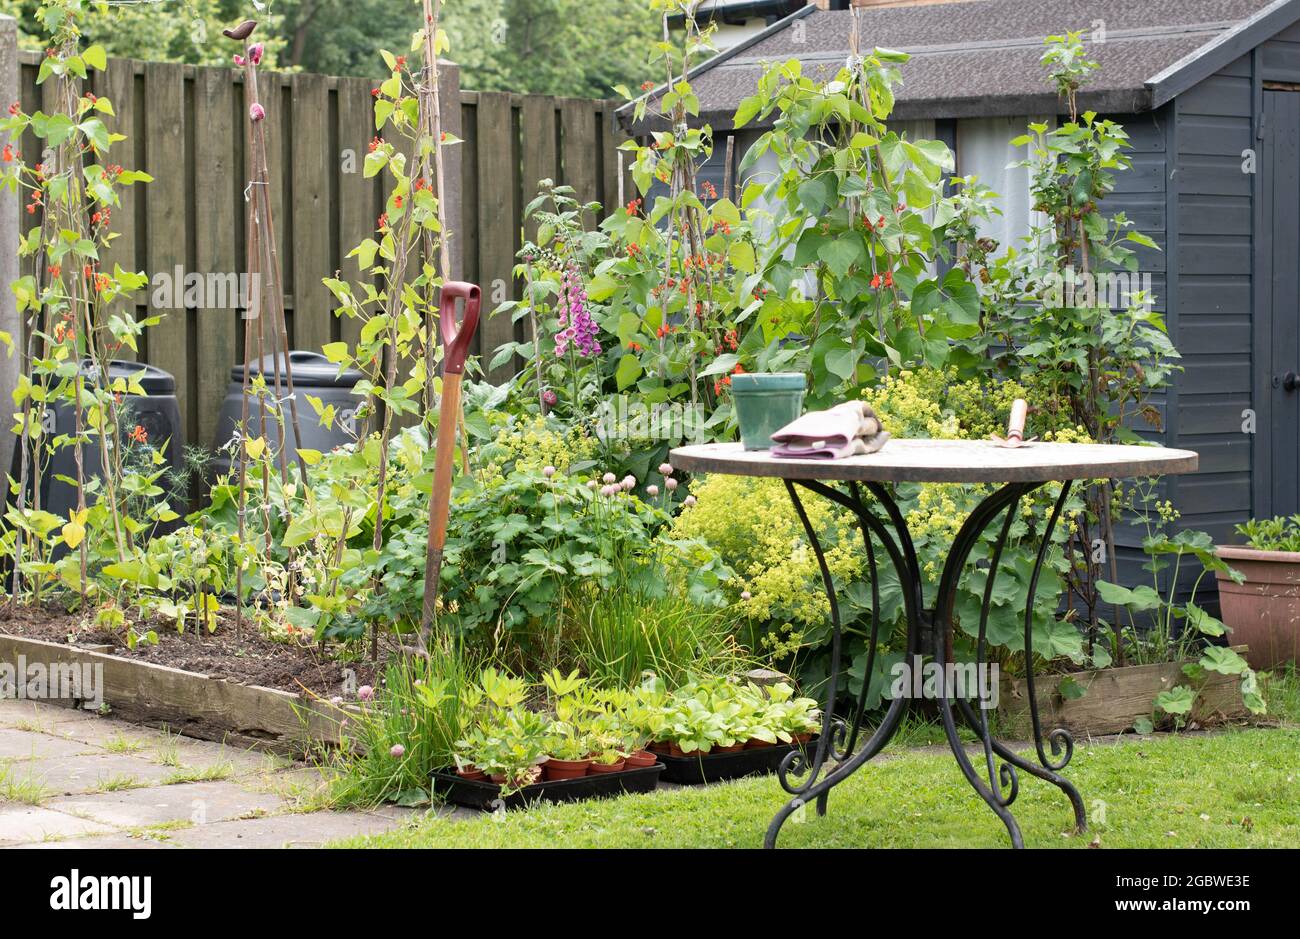 Authentic Garden scene with plants, garden shed and garden table Stock Photo